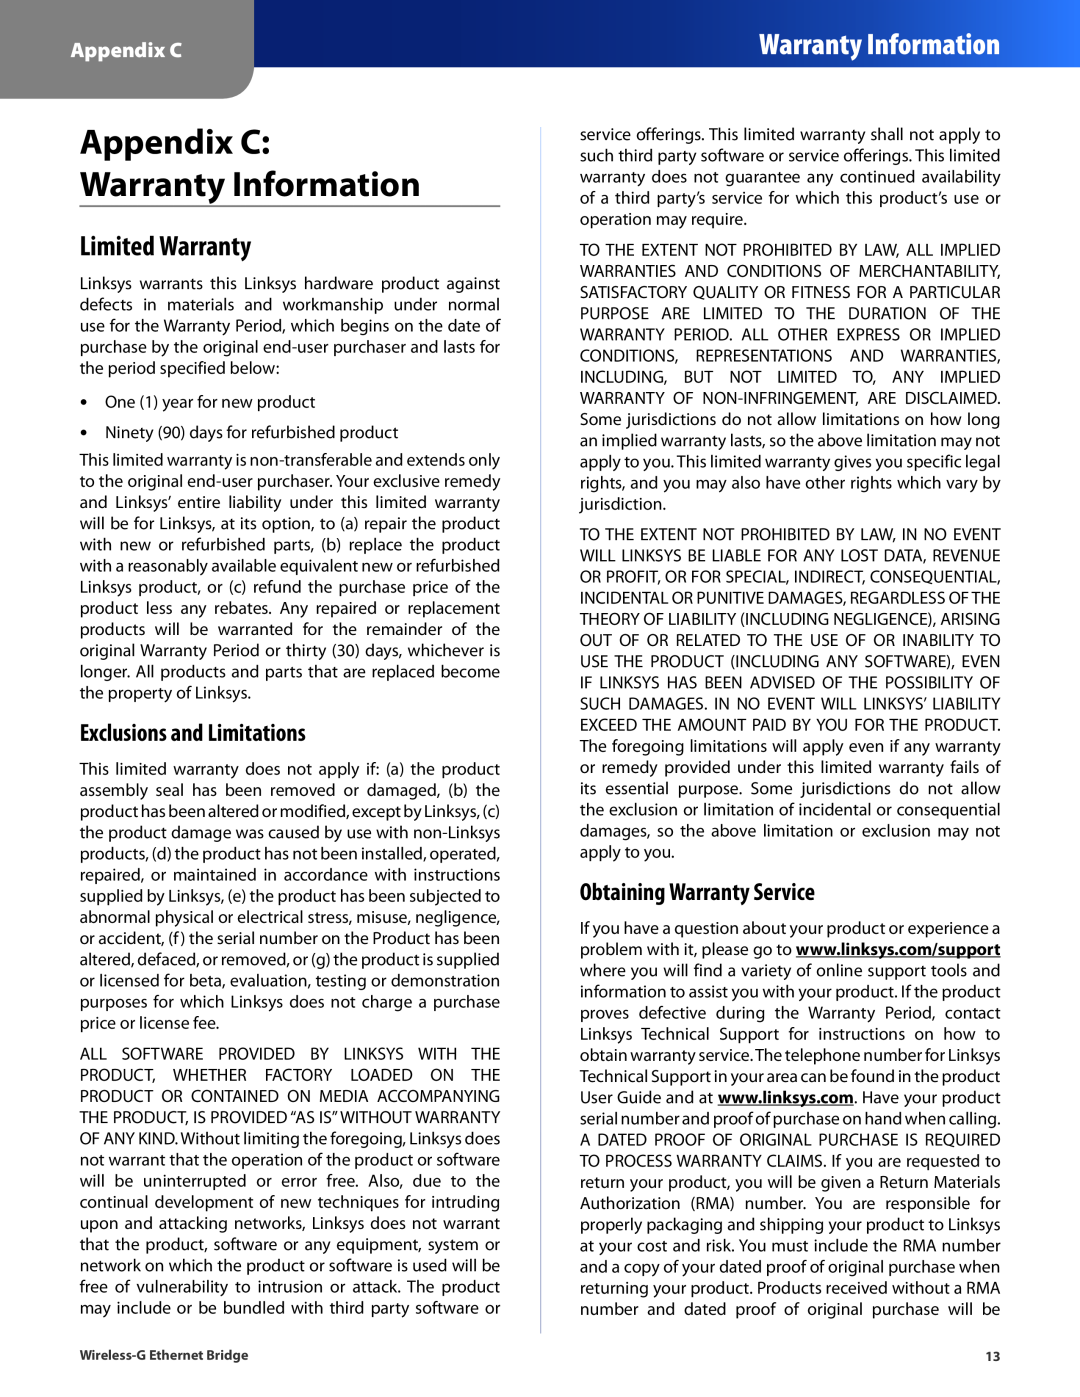 Cisco Systems WET54G manual Appendix C Warranty Information, Limited Warranty, Exclusions and Limitations 